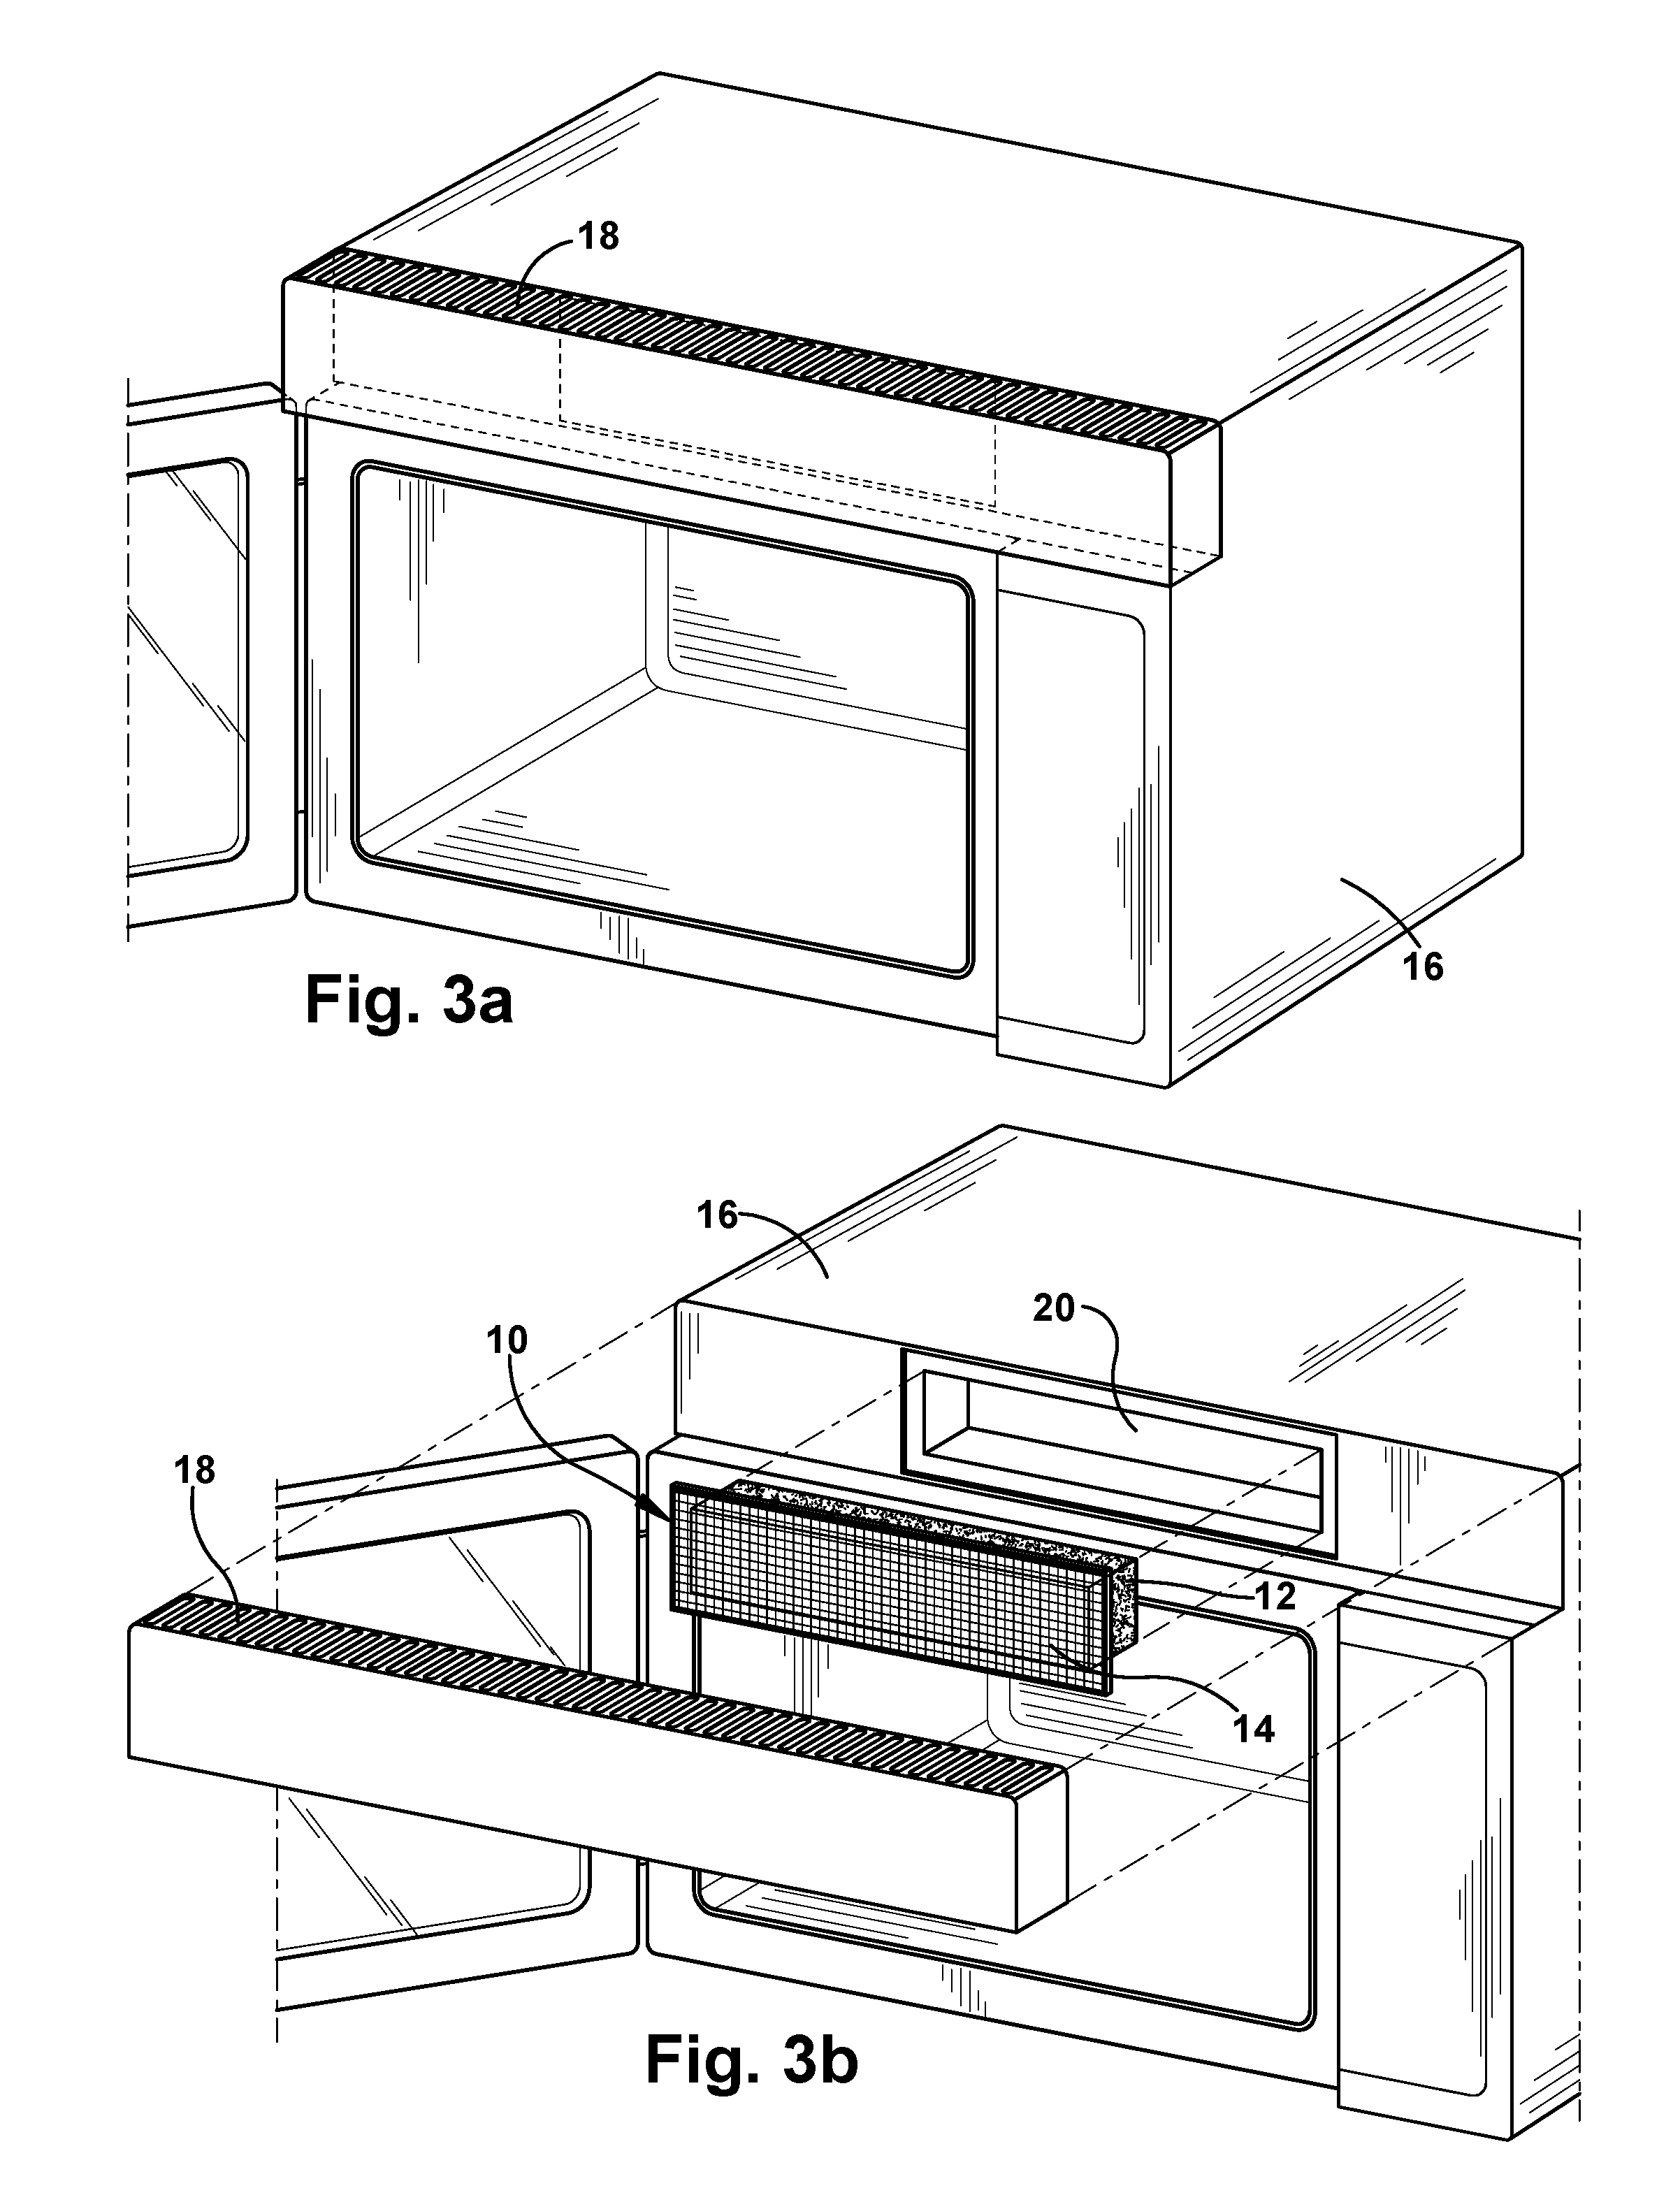 Vent filter and appliance utilizing such a filter